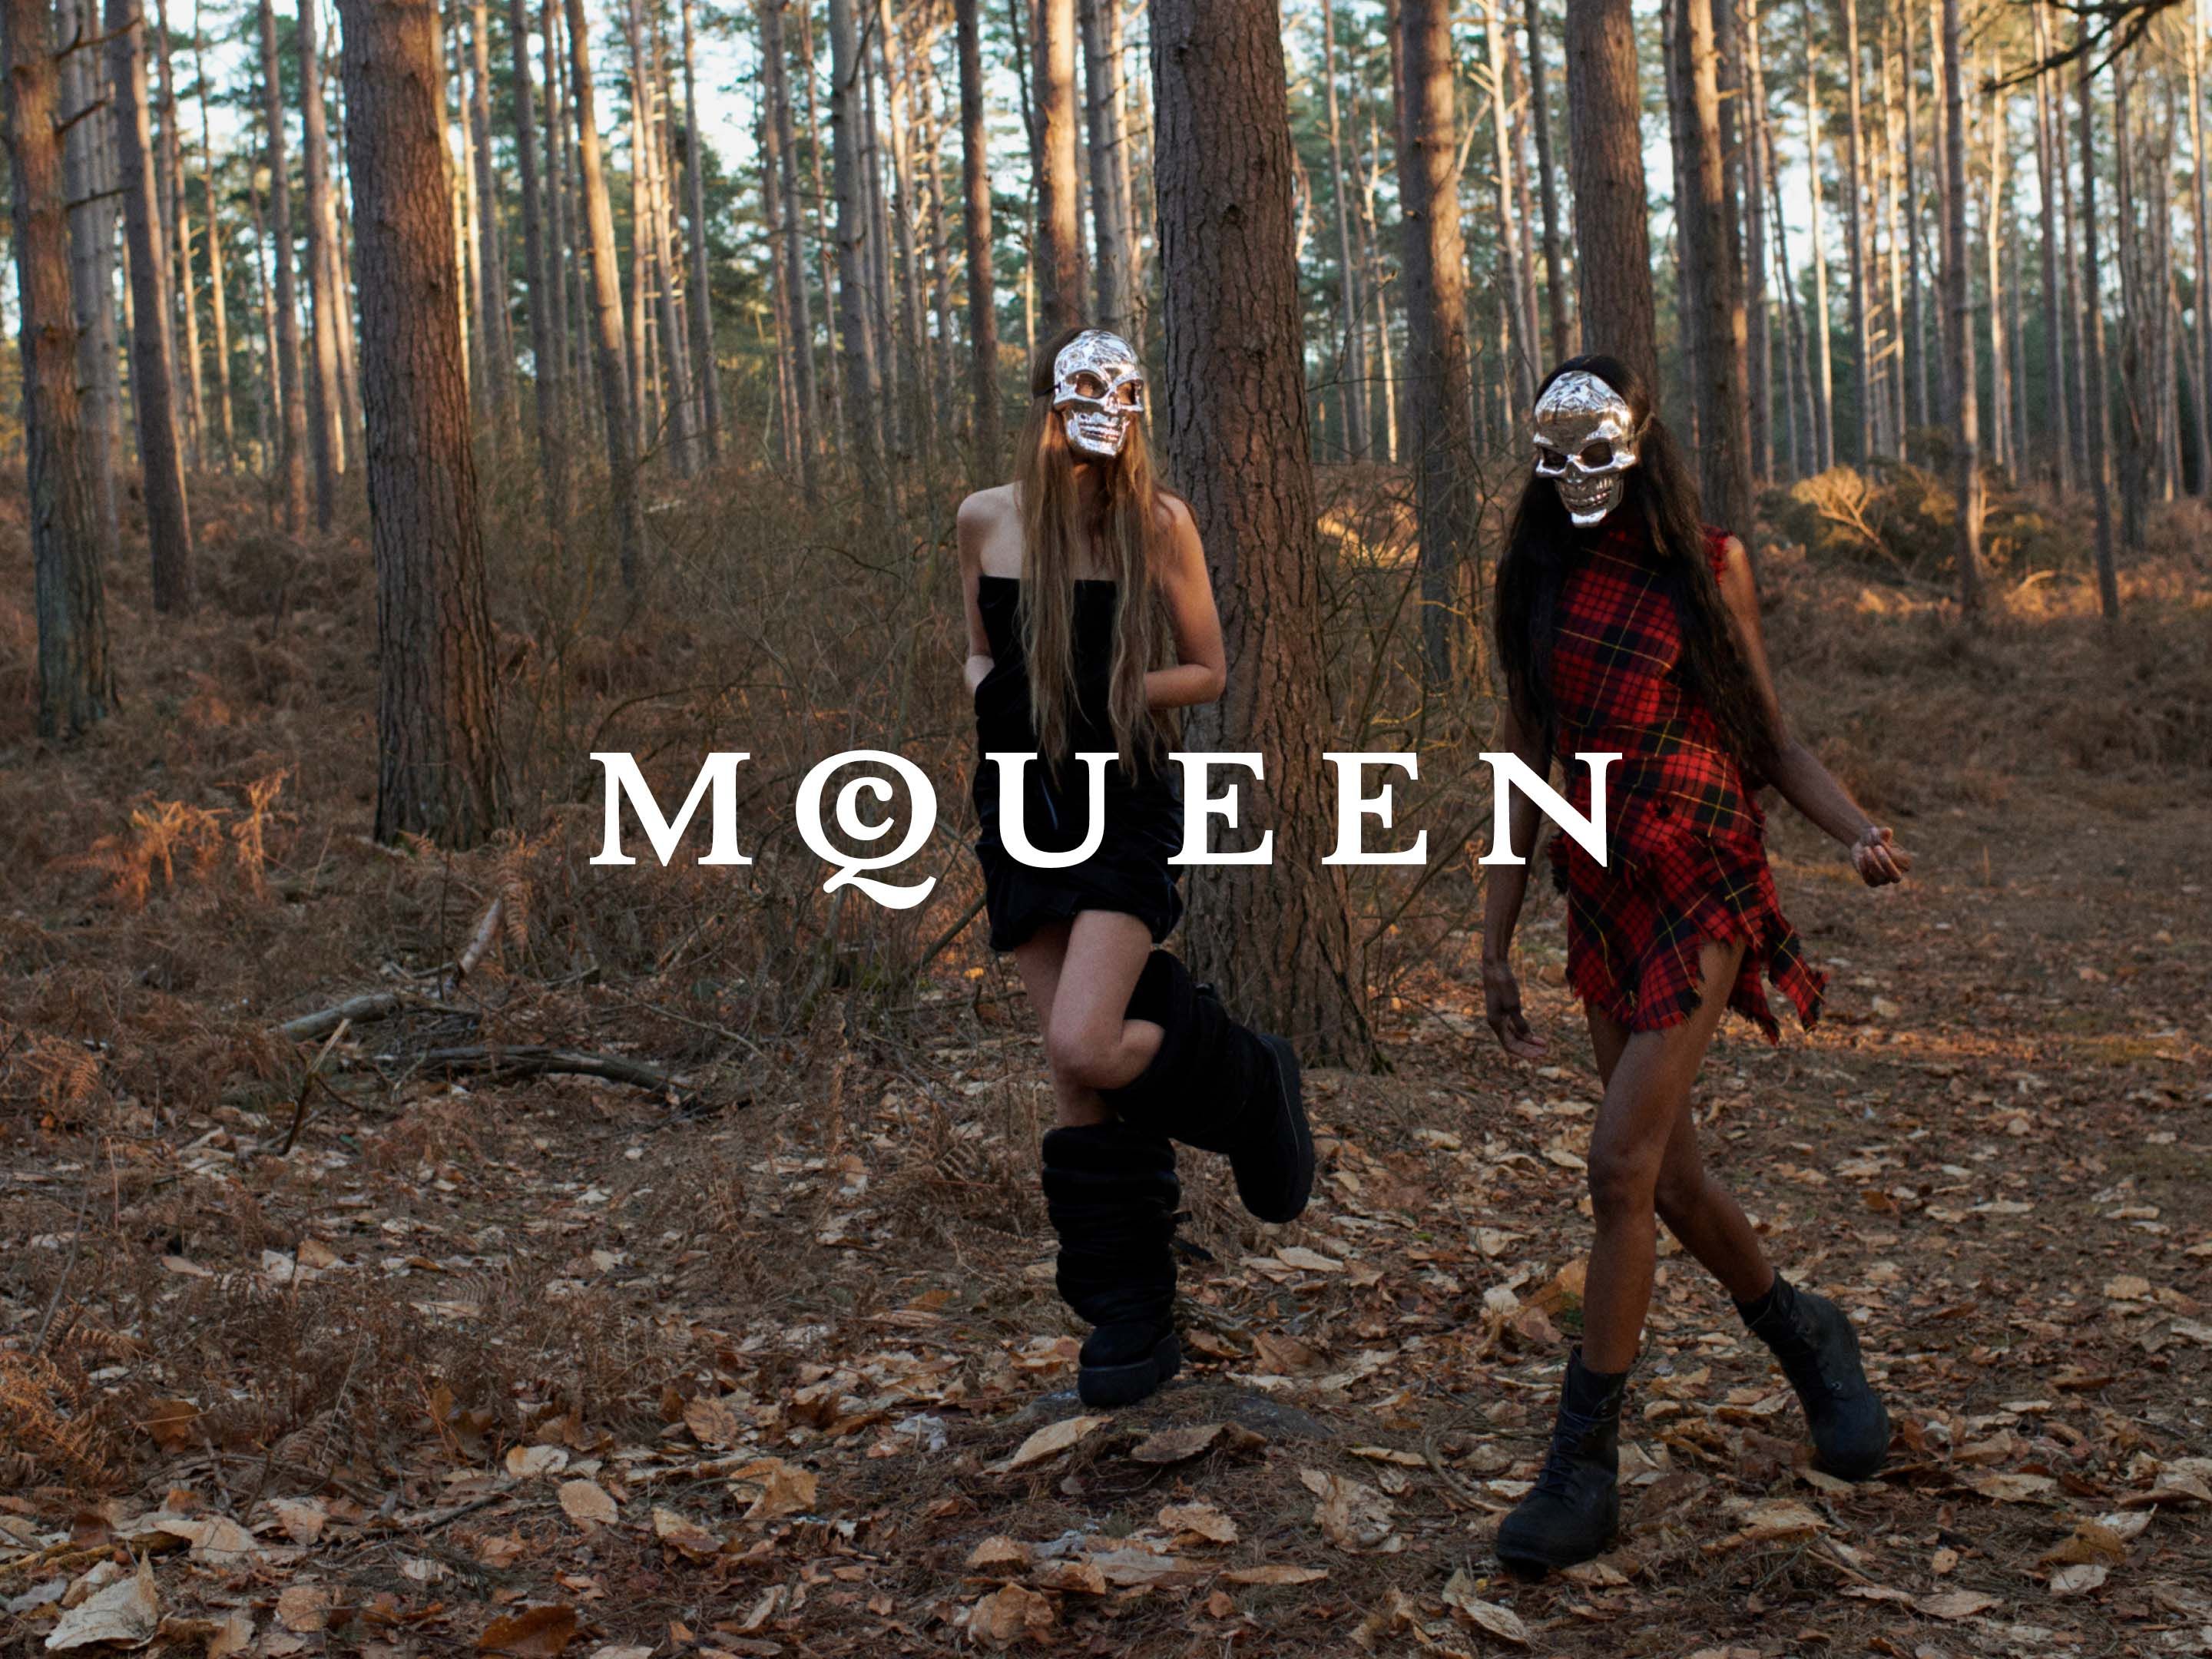 Your first look at Seán McGirr's vision for Alexander McQueen